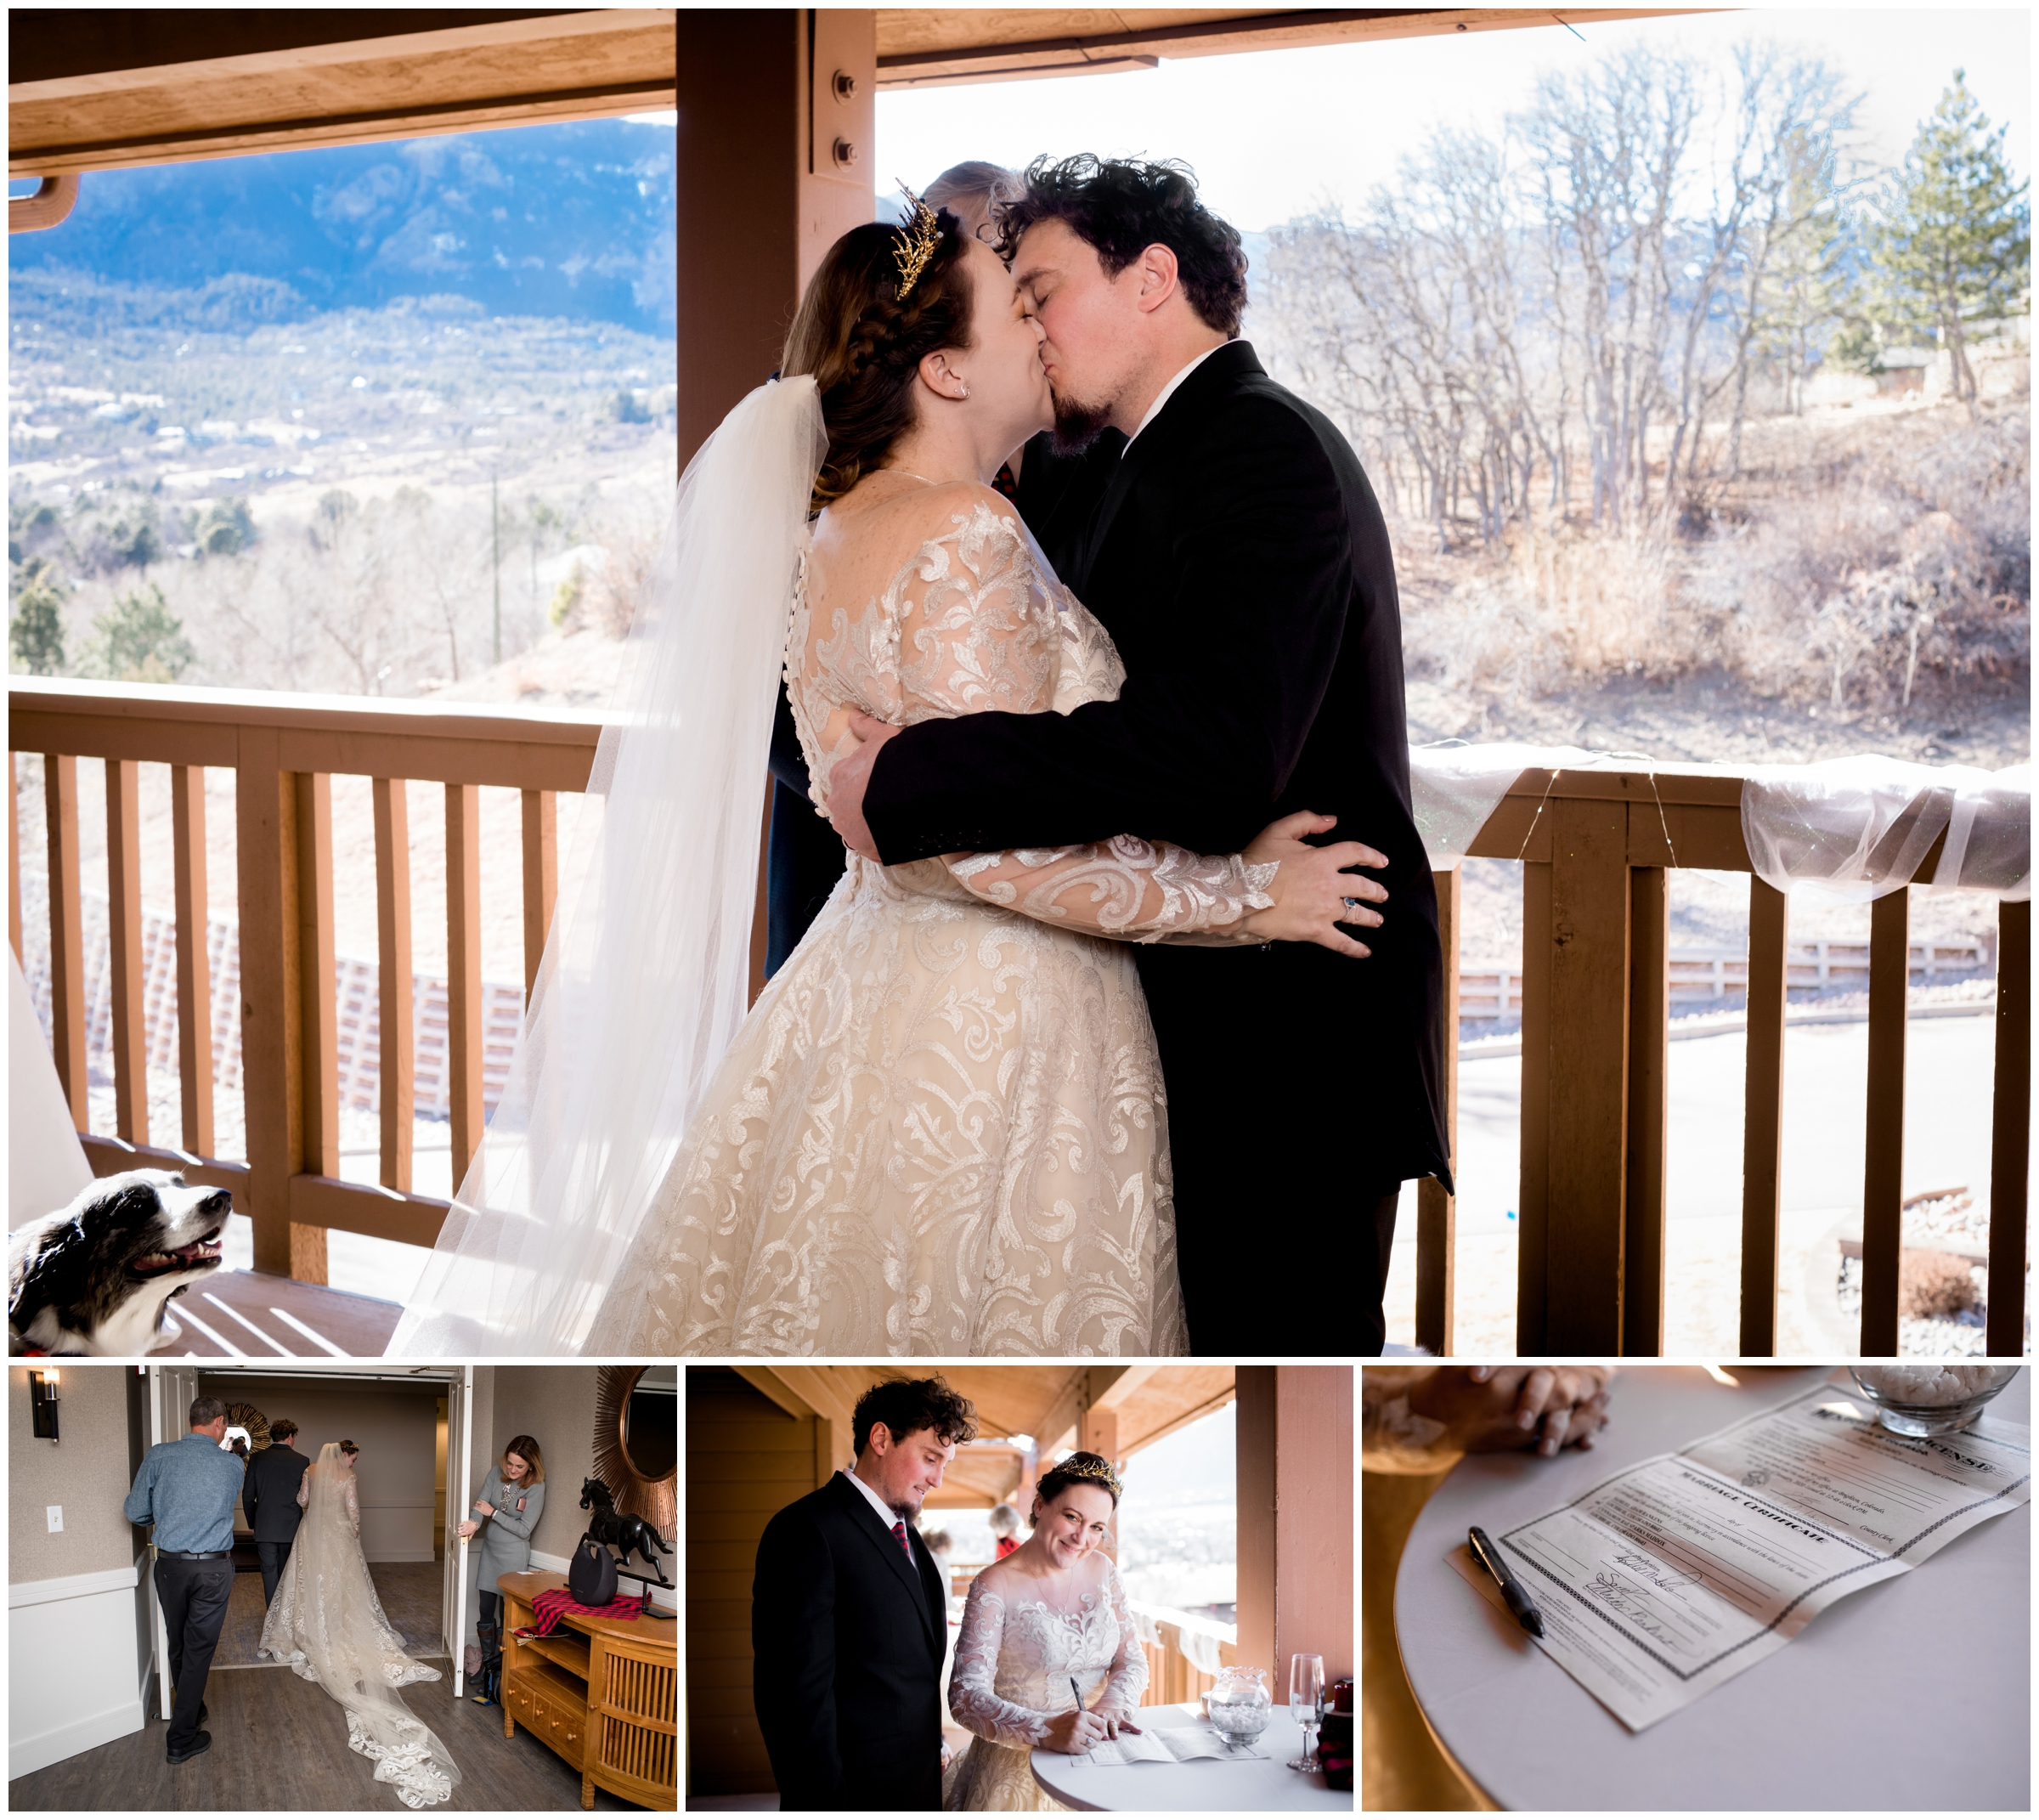 first kiss during wedding ceremony at Cheyenne Mountain Resort Colorado Springs 